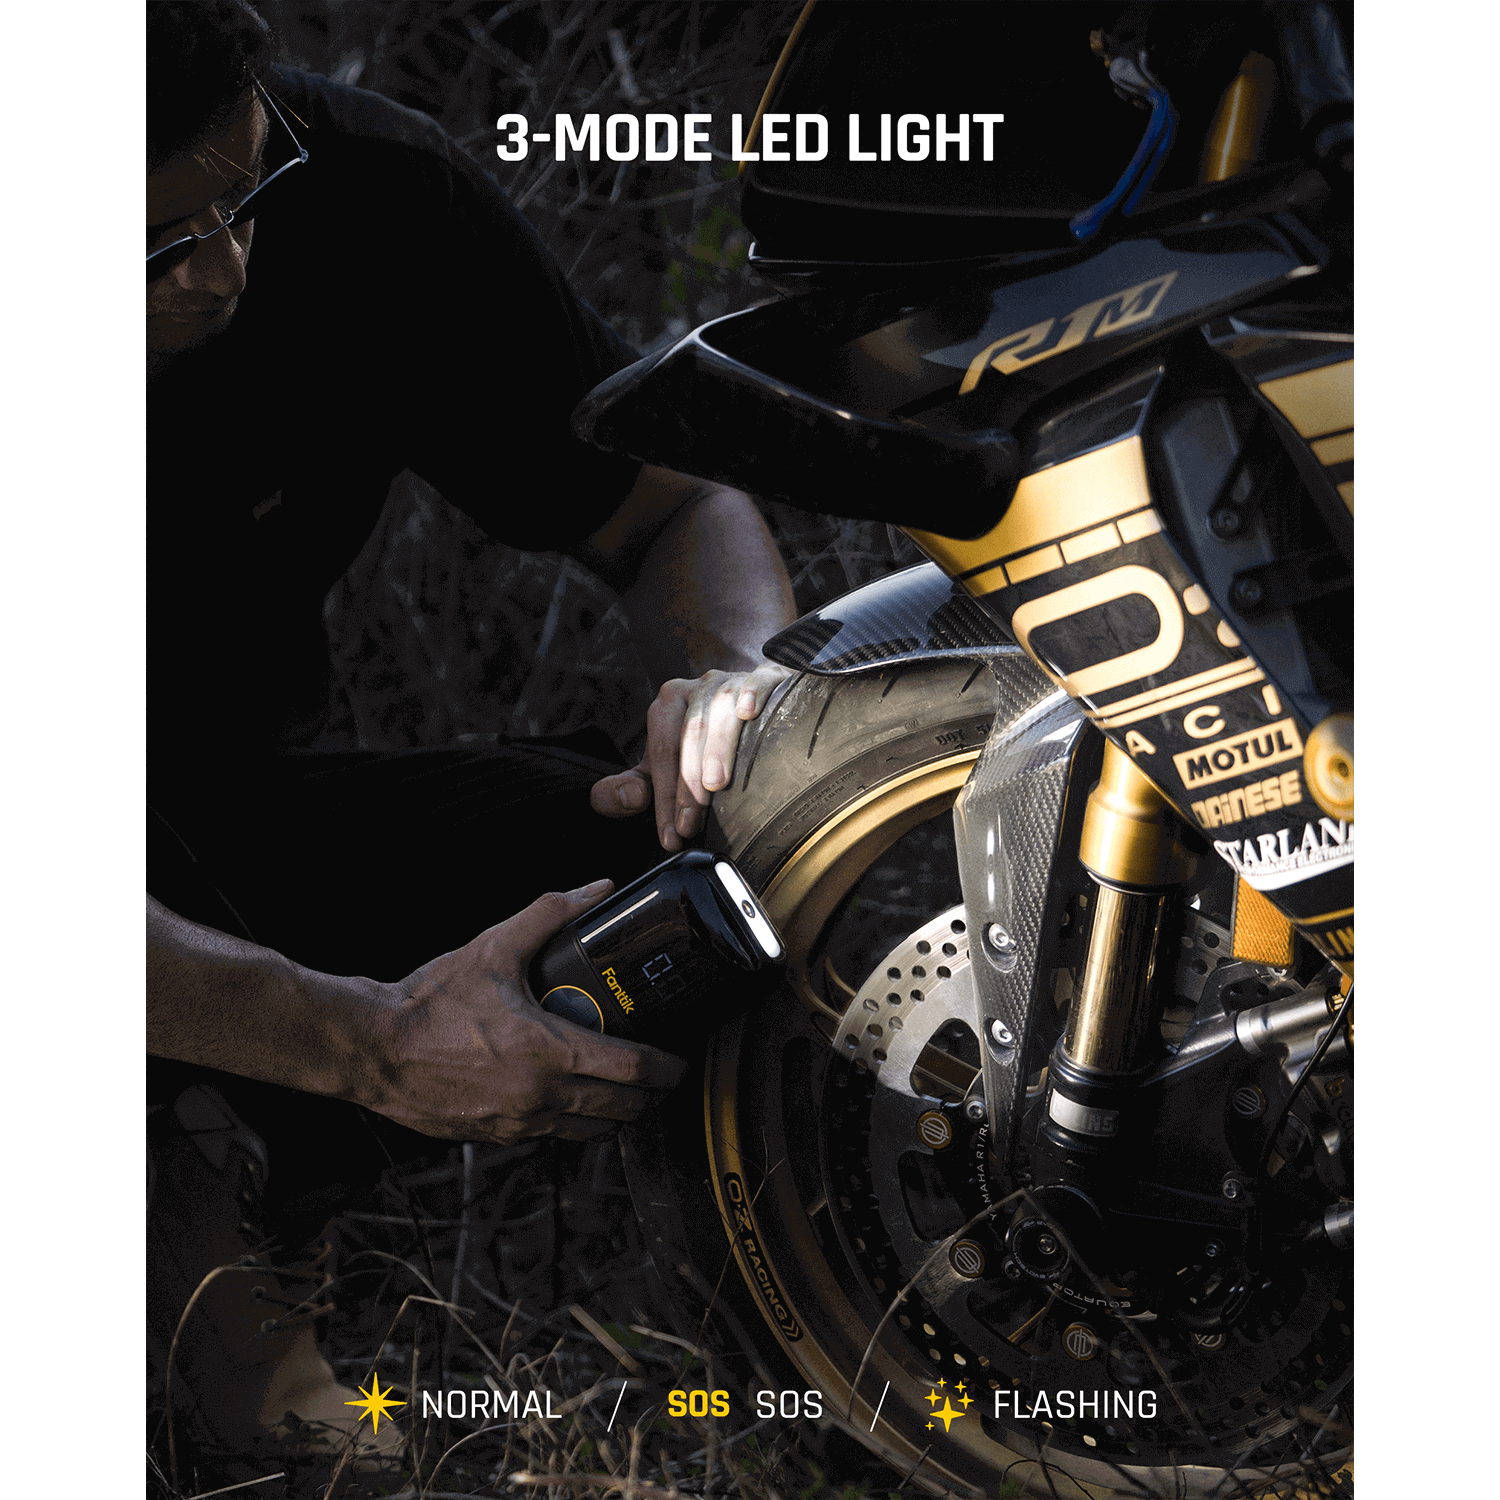 4 types of preset inflation modes are clearly displayed on the large LED screen, convenient for you to choose. The manual mode allows you to set pressure value according to the inflation object and the inflation stops automatically at the set pressure. 